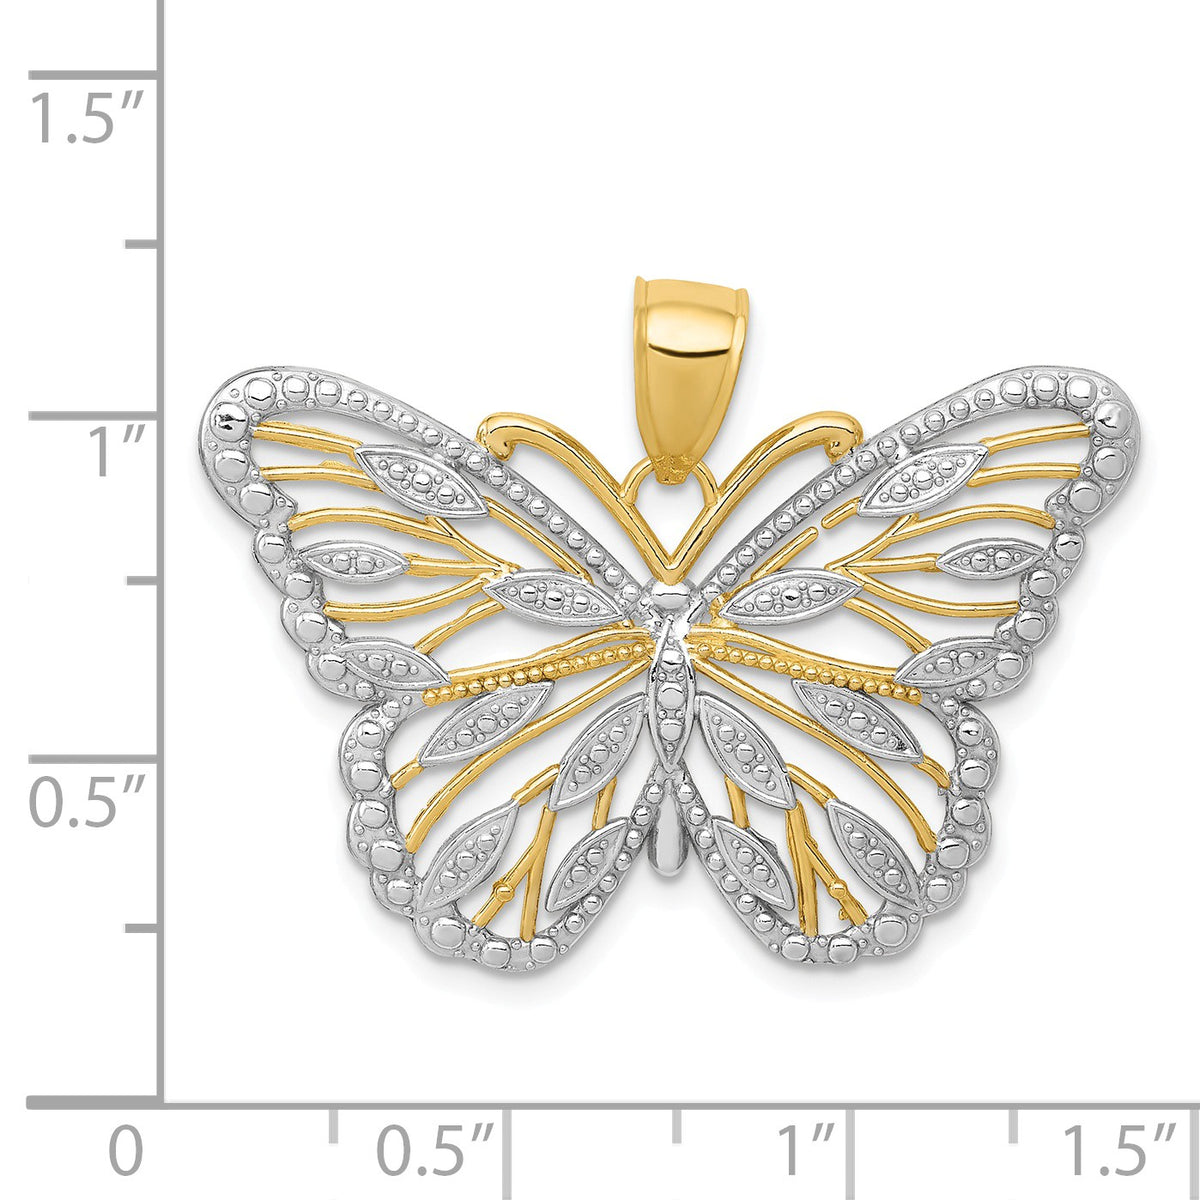 Alternate view of the 14k Yellow Gold and White Rhodium Ornate Butterfly Pendant, 34mm by The Black Bow Jewelry Co.